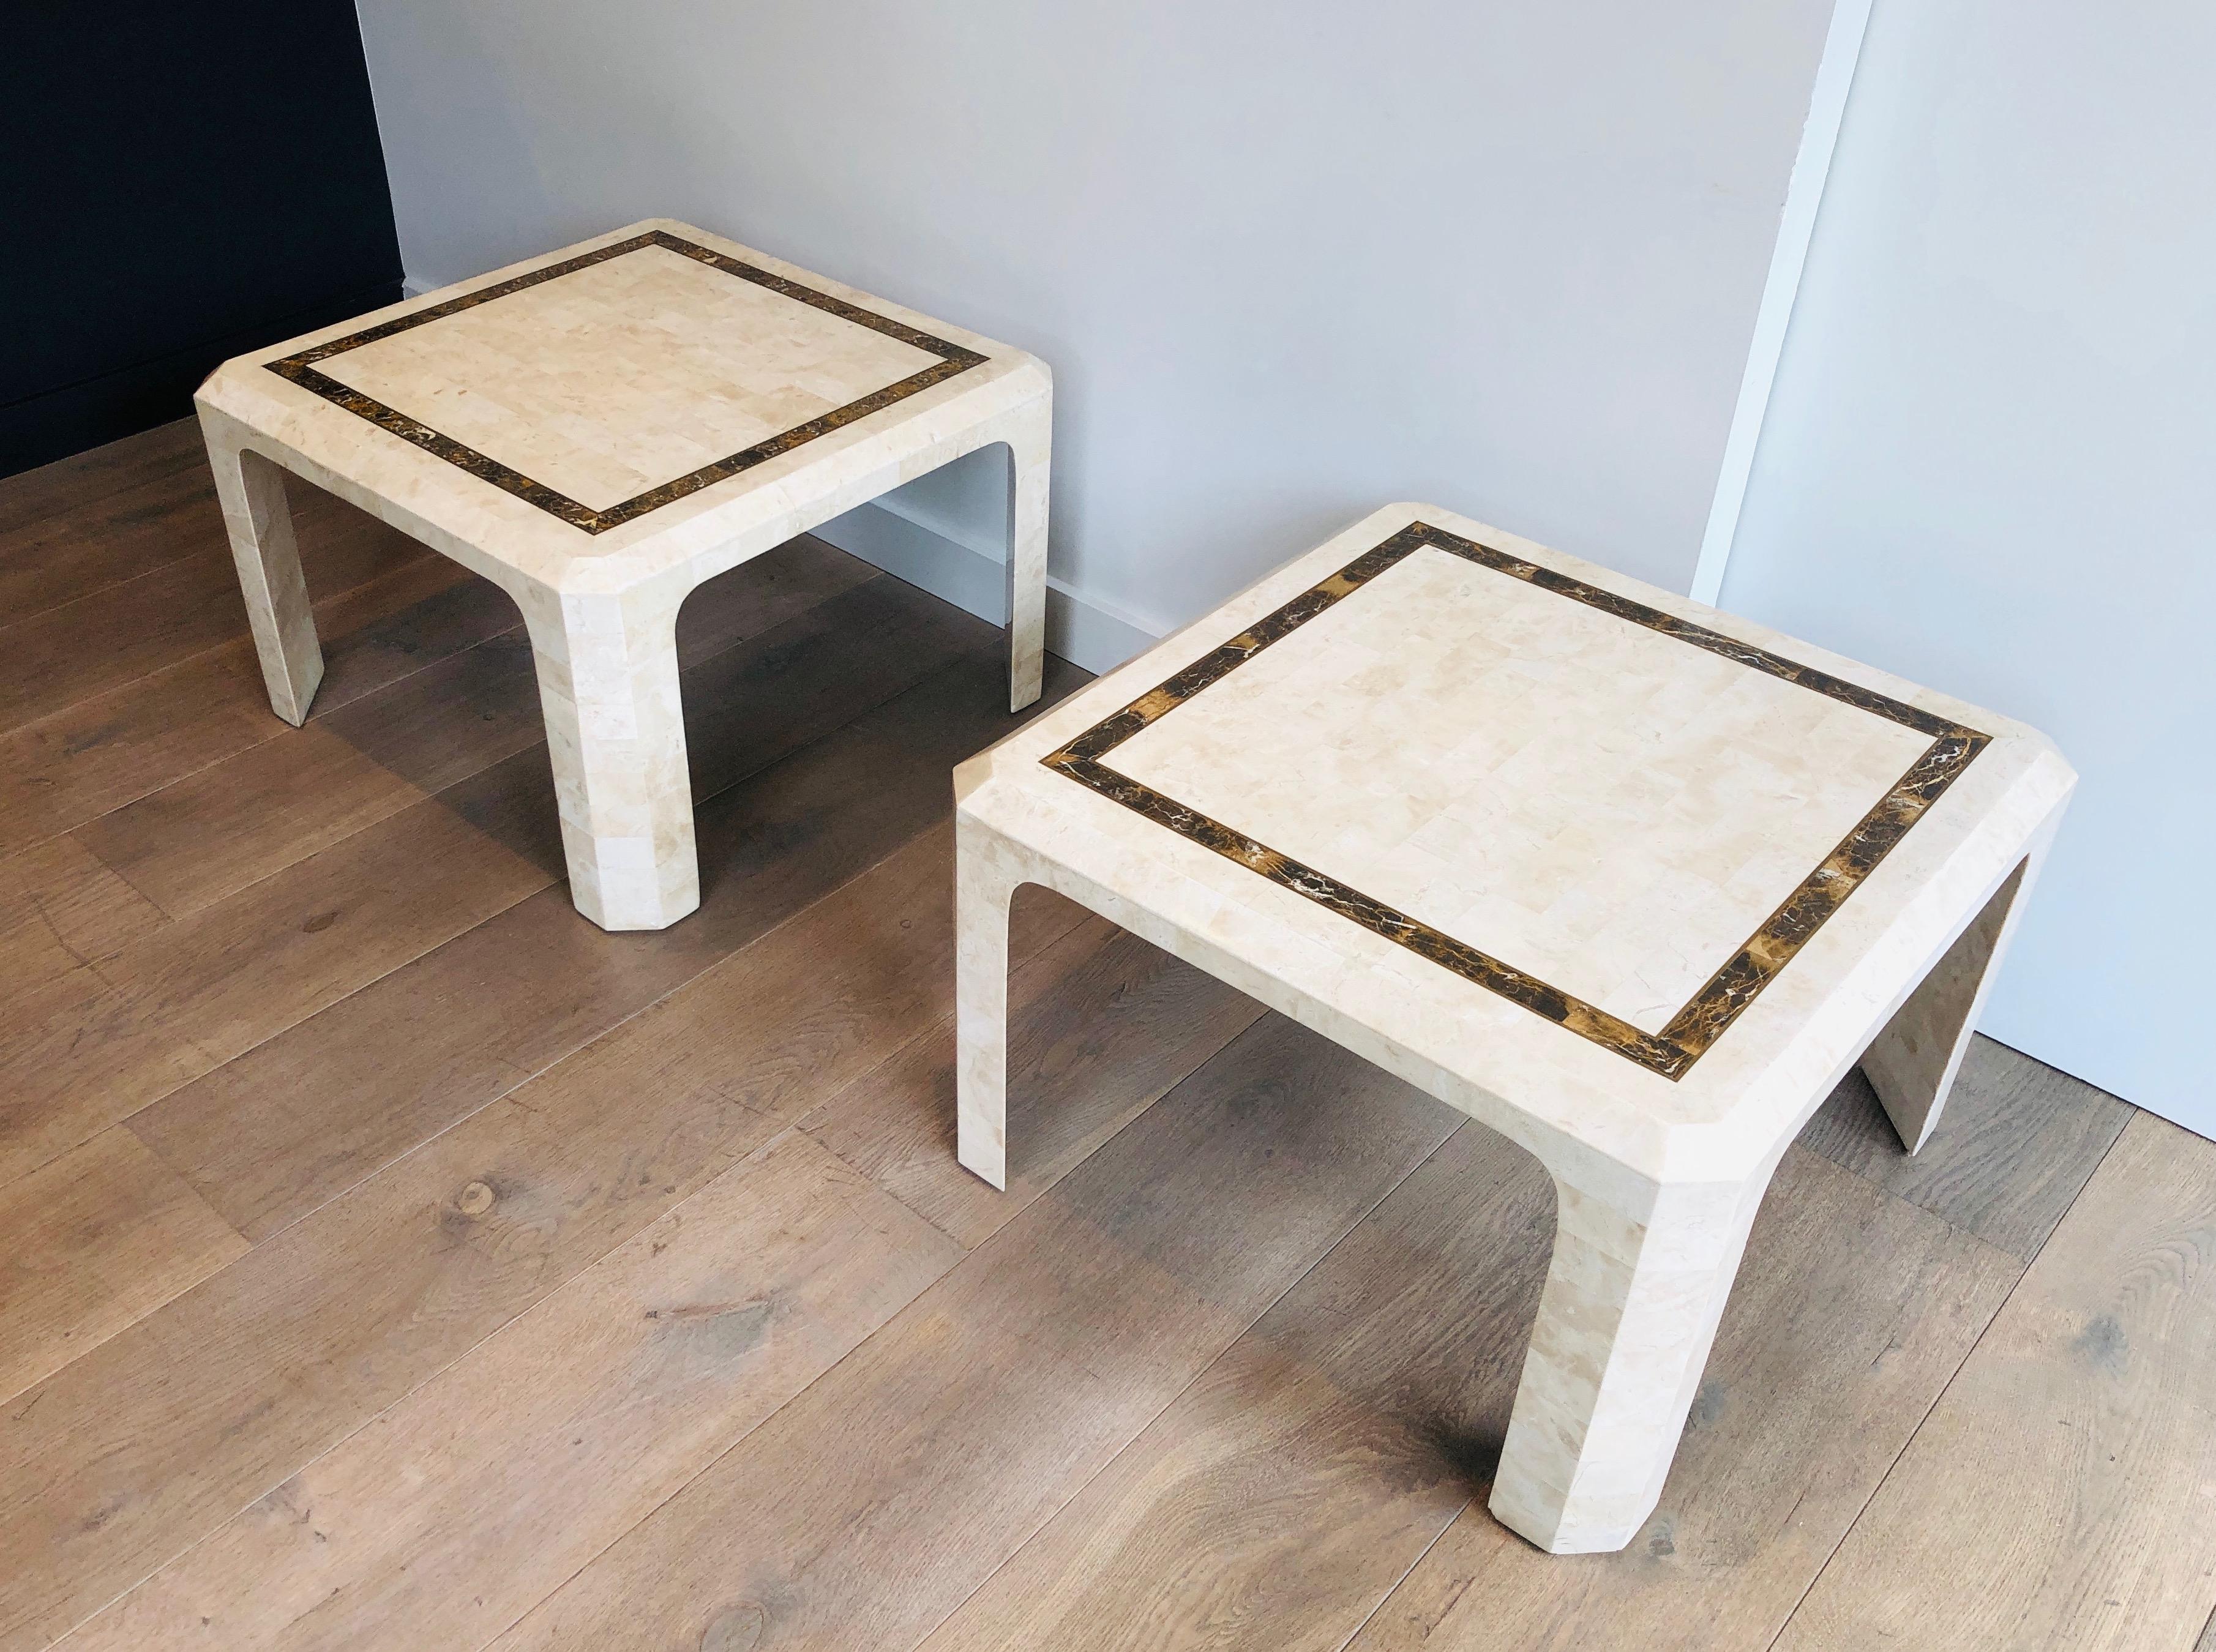 Pair of Marble Plates Side Tables with a Brass Line, French, Circa 1970 For Sale 4